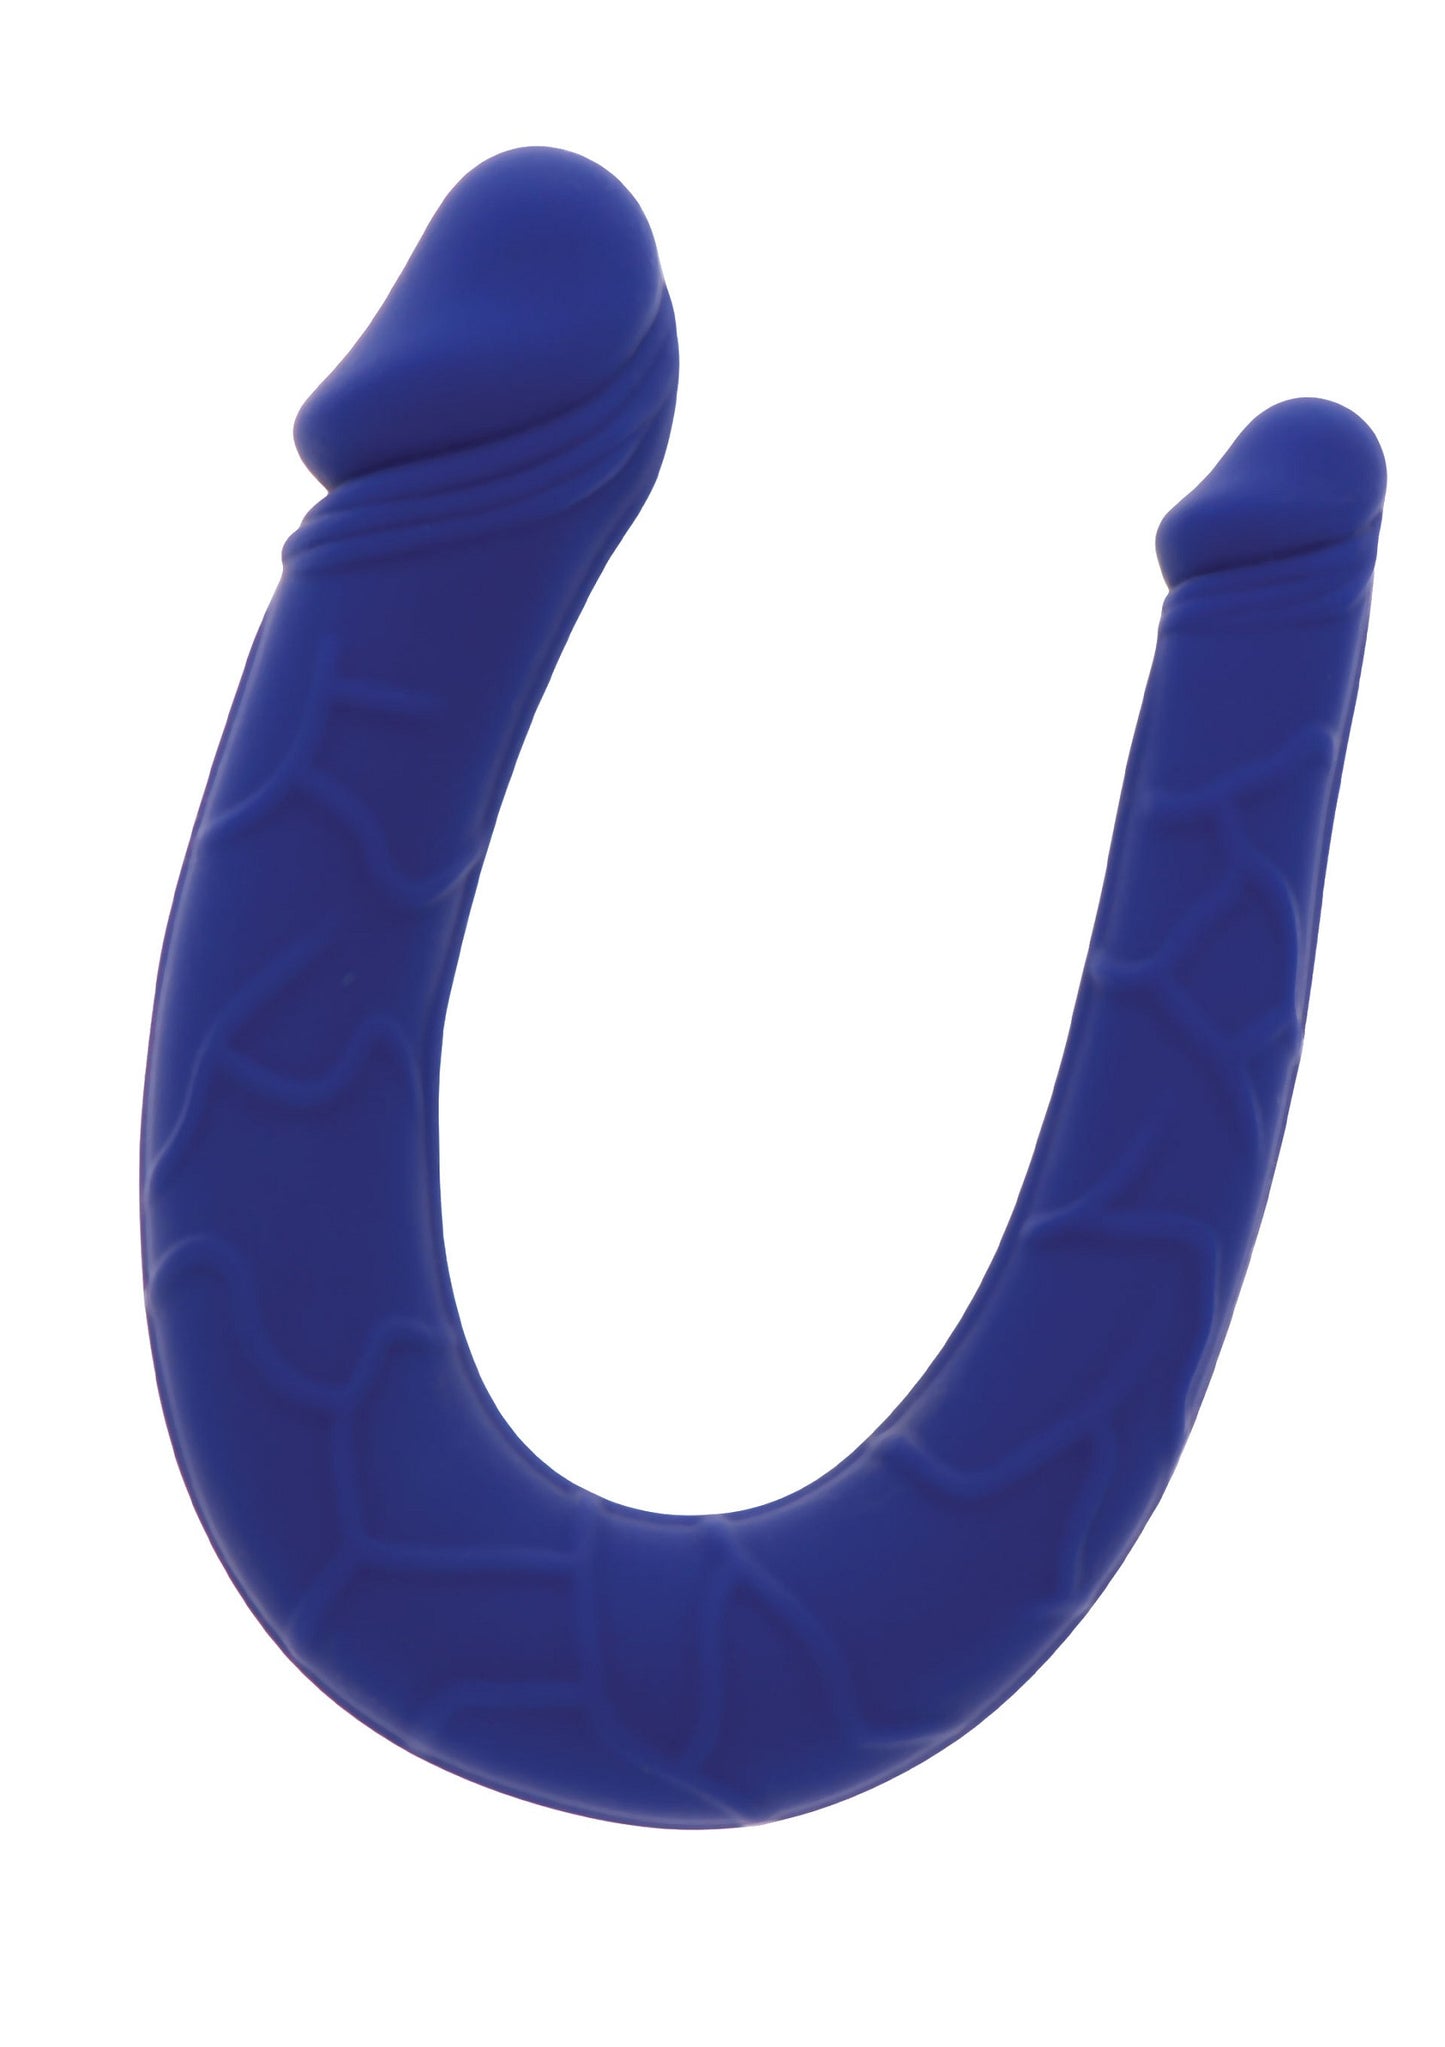 ToyJoy Get Real Realistic Mini Double Dong BLUE - 4